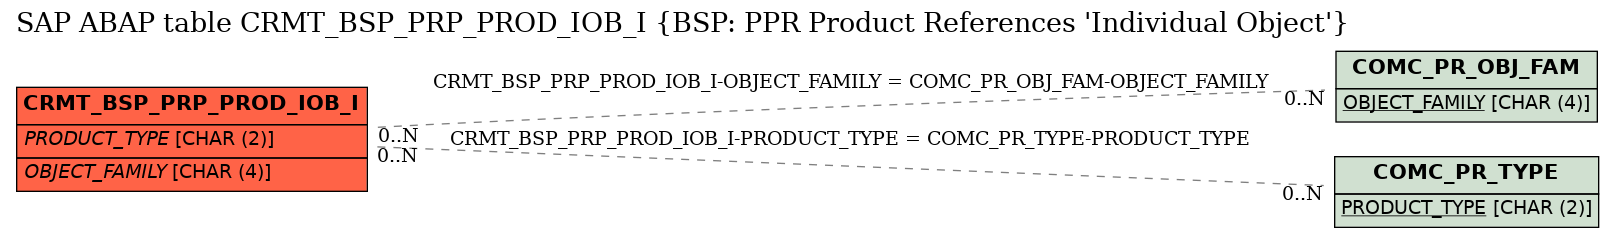 E-R Diagram for table CRMT_BSP_PRP_PROD_IOB_I (BSP: PPR Product References 'Individual Object')